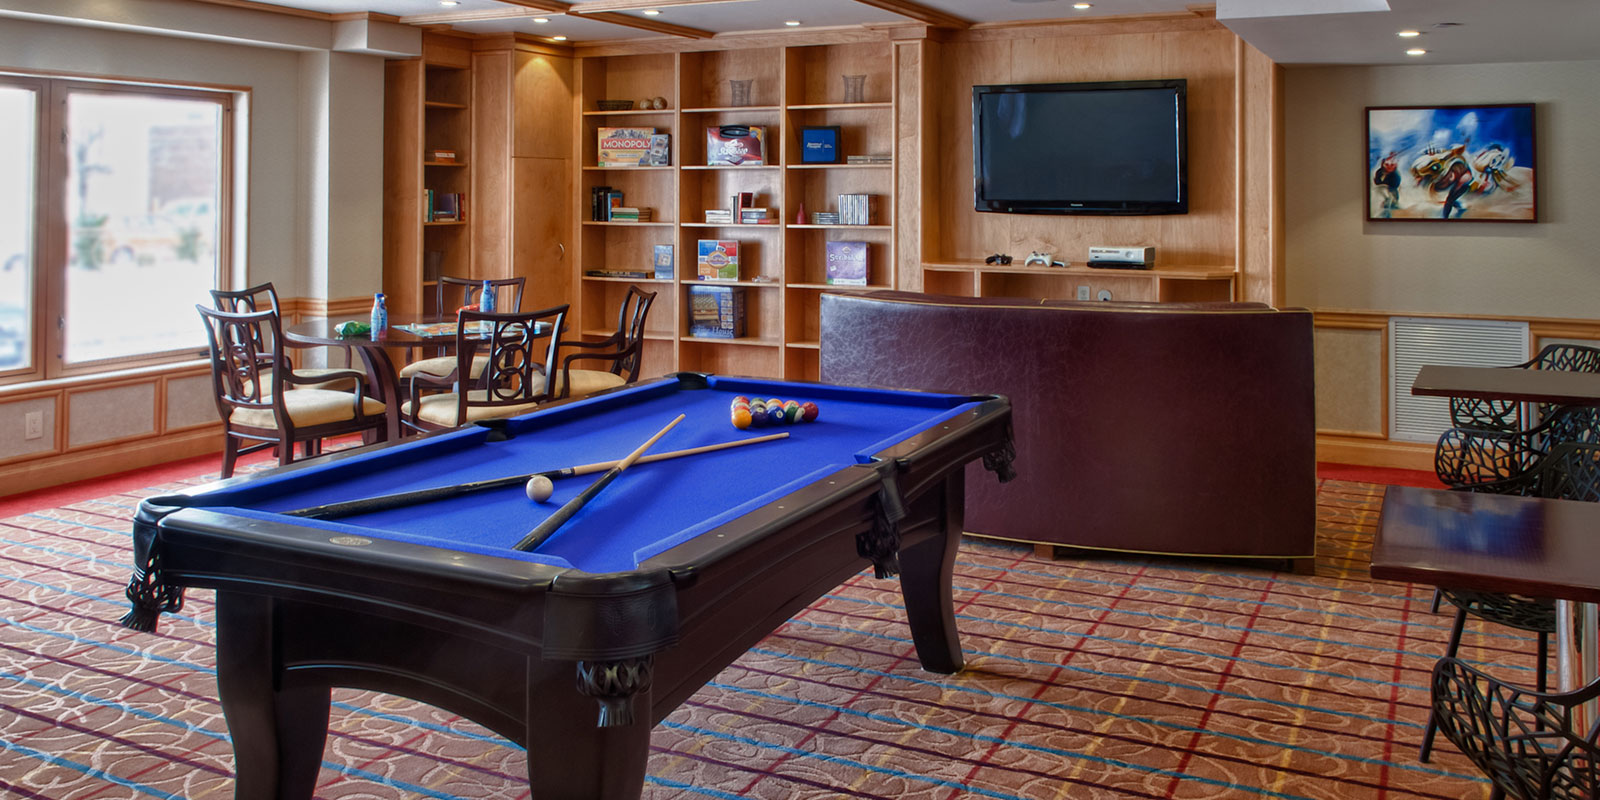 lounge area with pool table